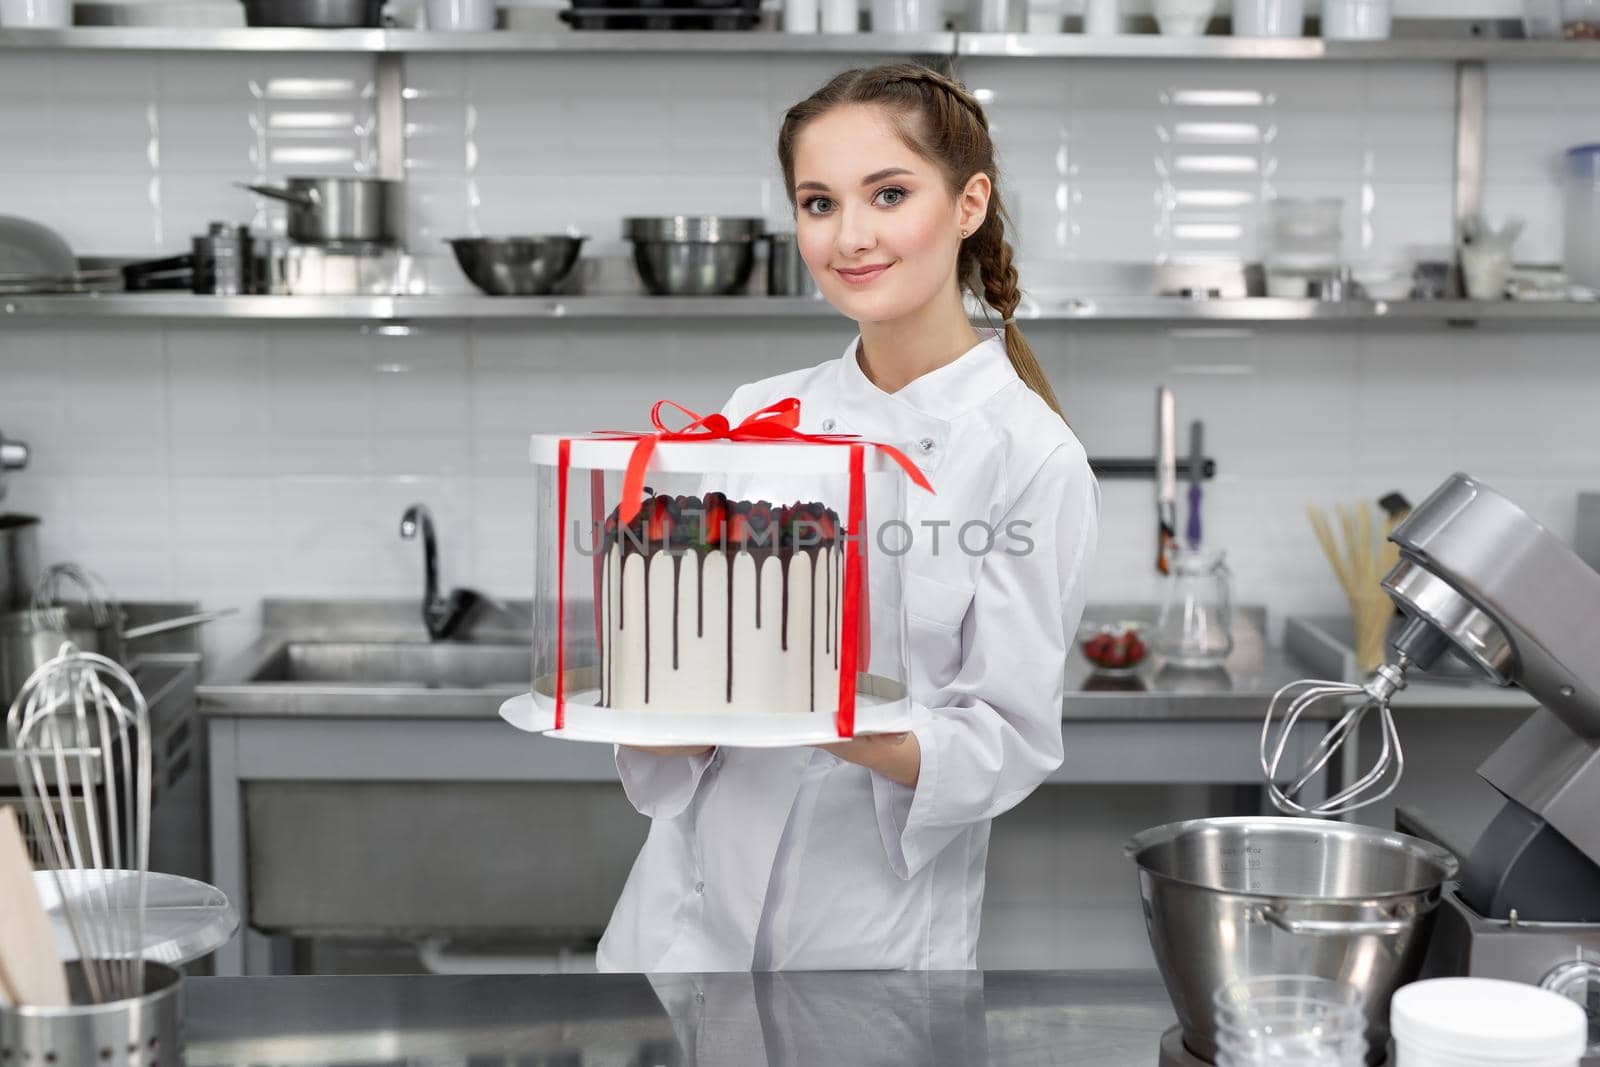 Pastry chef is holding a cake in a package by StudioPeace